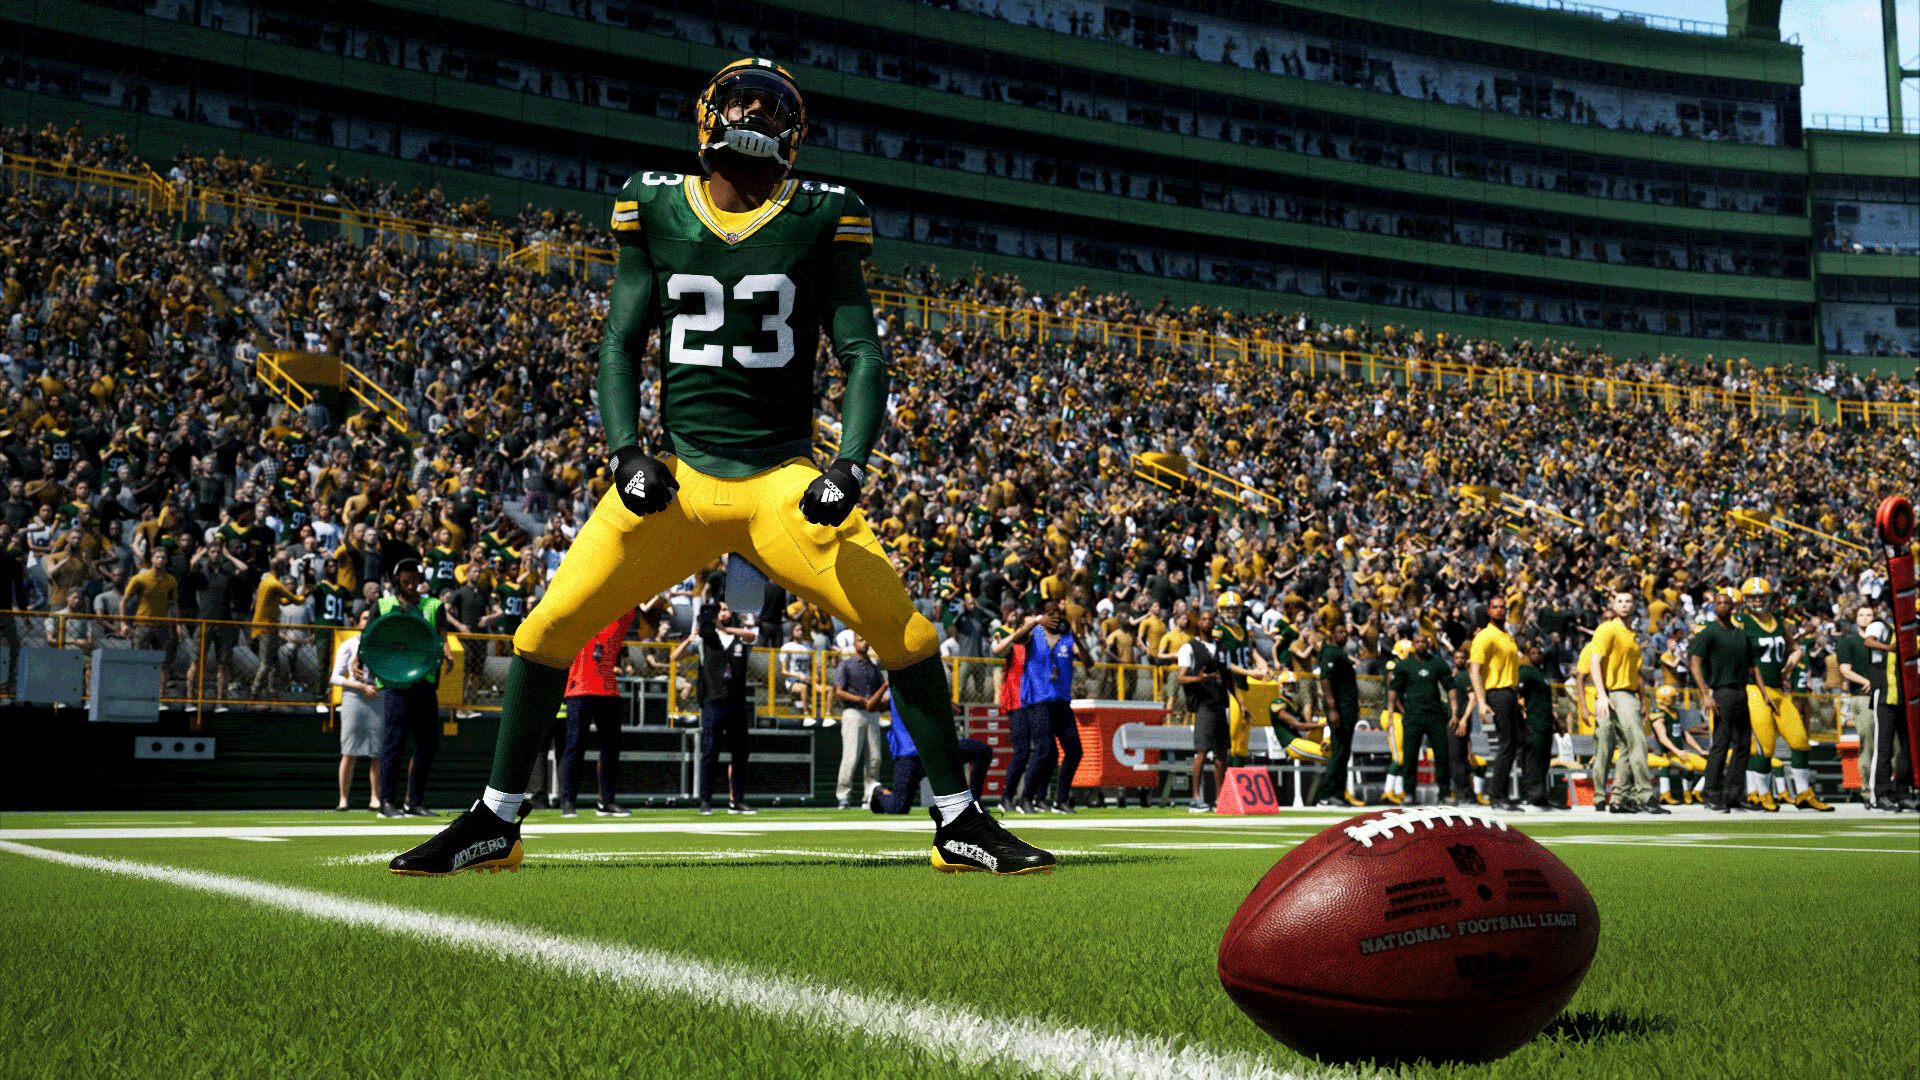 A defensive player for the Green Bay Packers celebrates a stop in the background with the football shown inches short of the goal line in the foreground, in a screen captured from Madden NFL 24